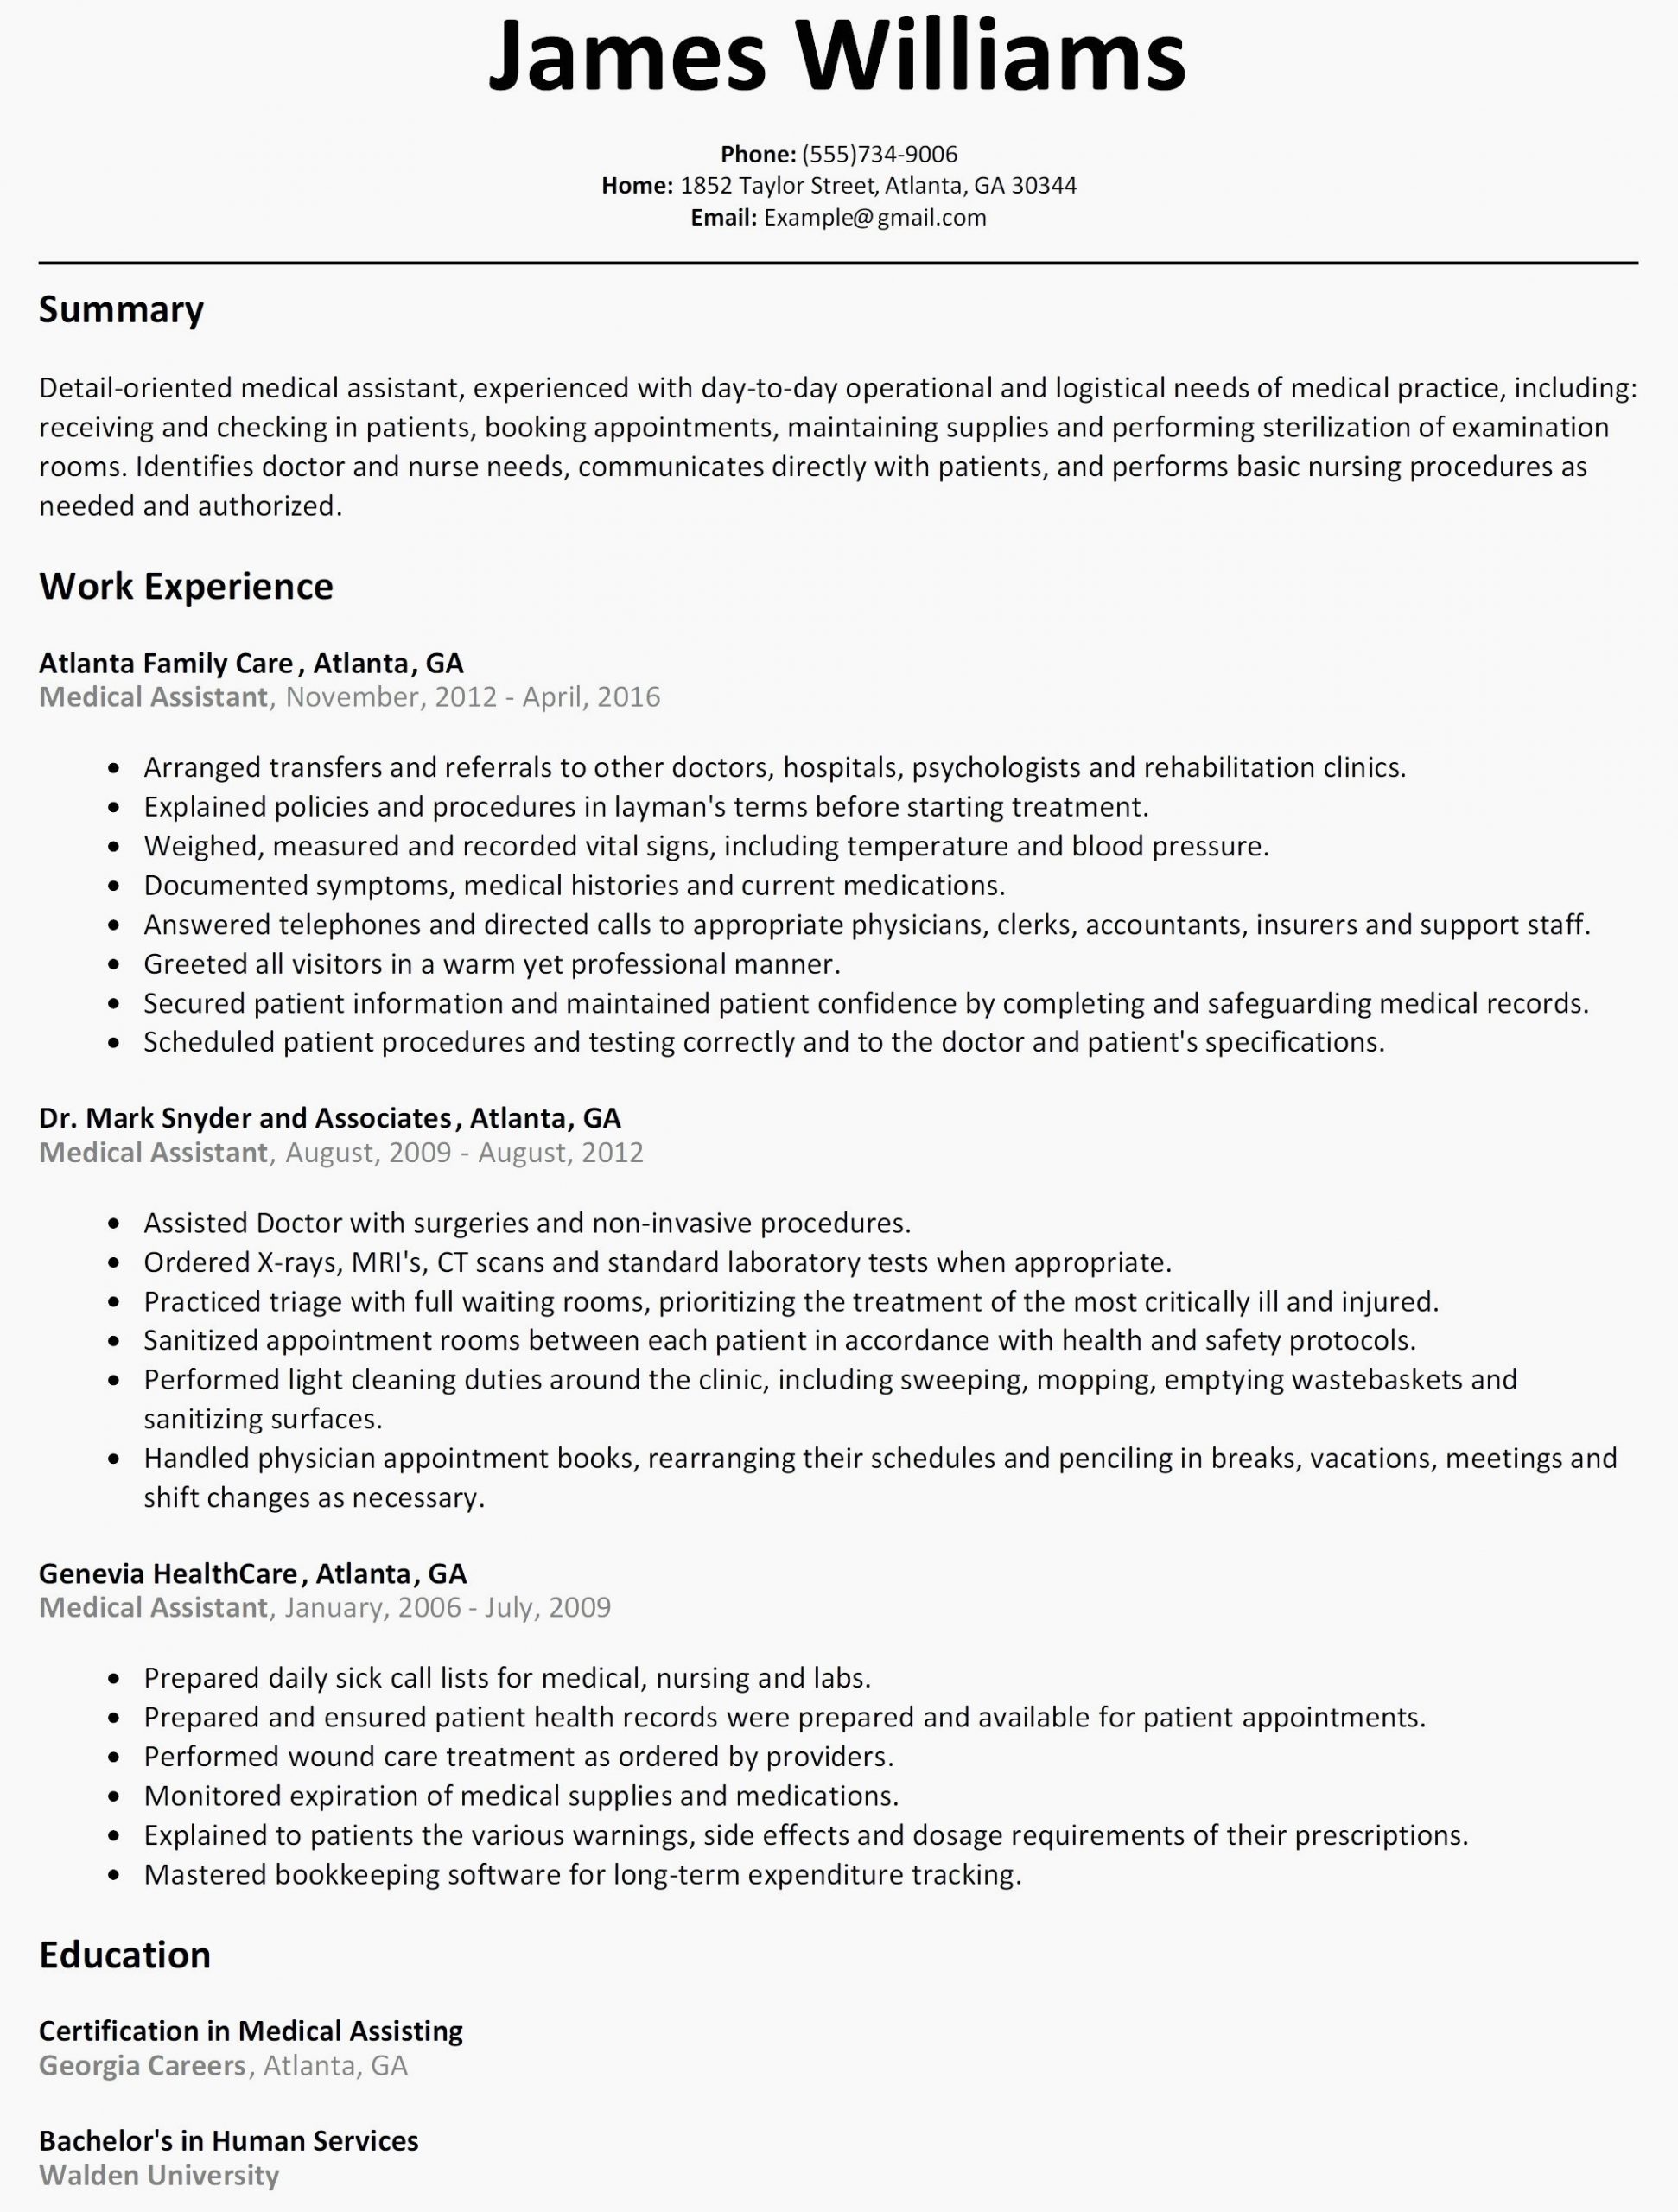 Sample Resume for Housewife with No Work Experience Housewife Resume Sample October 2021